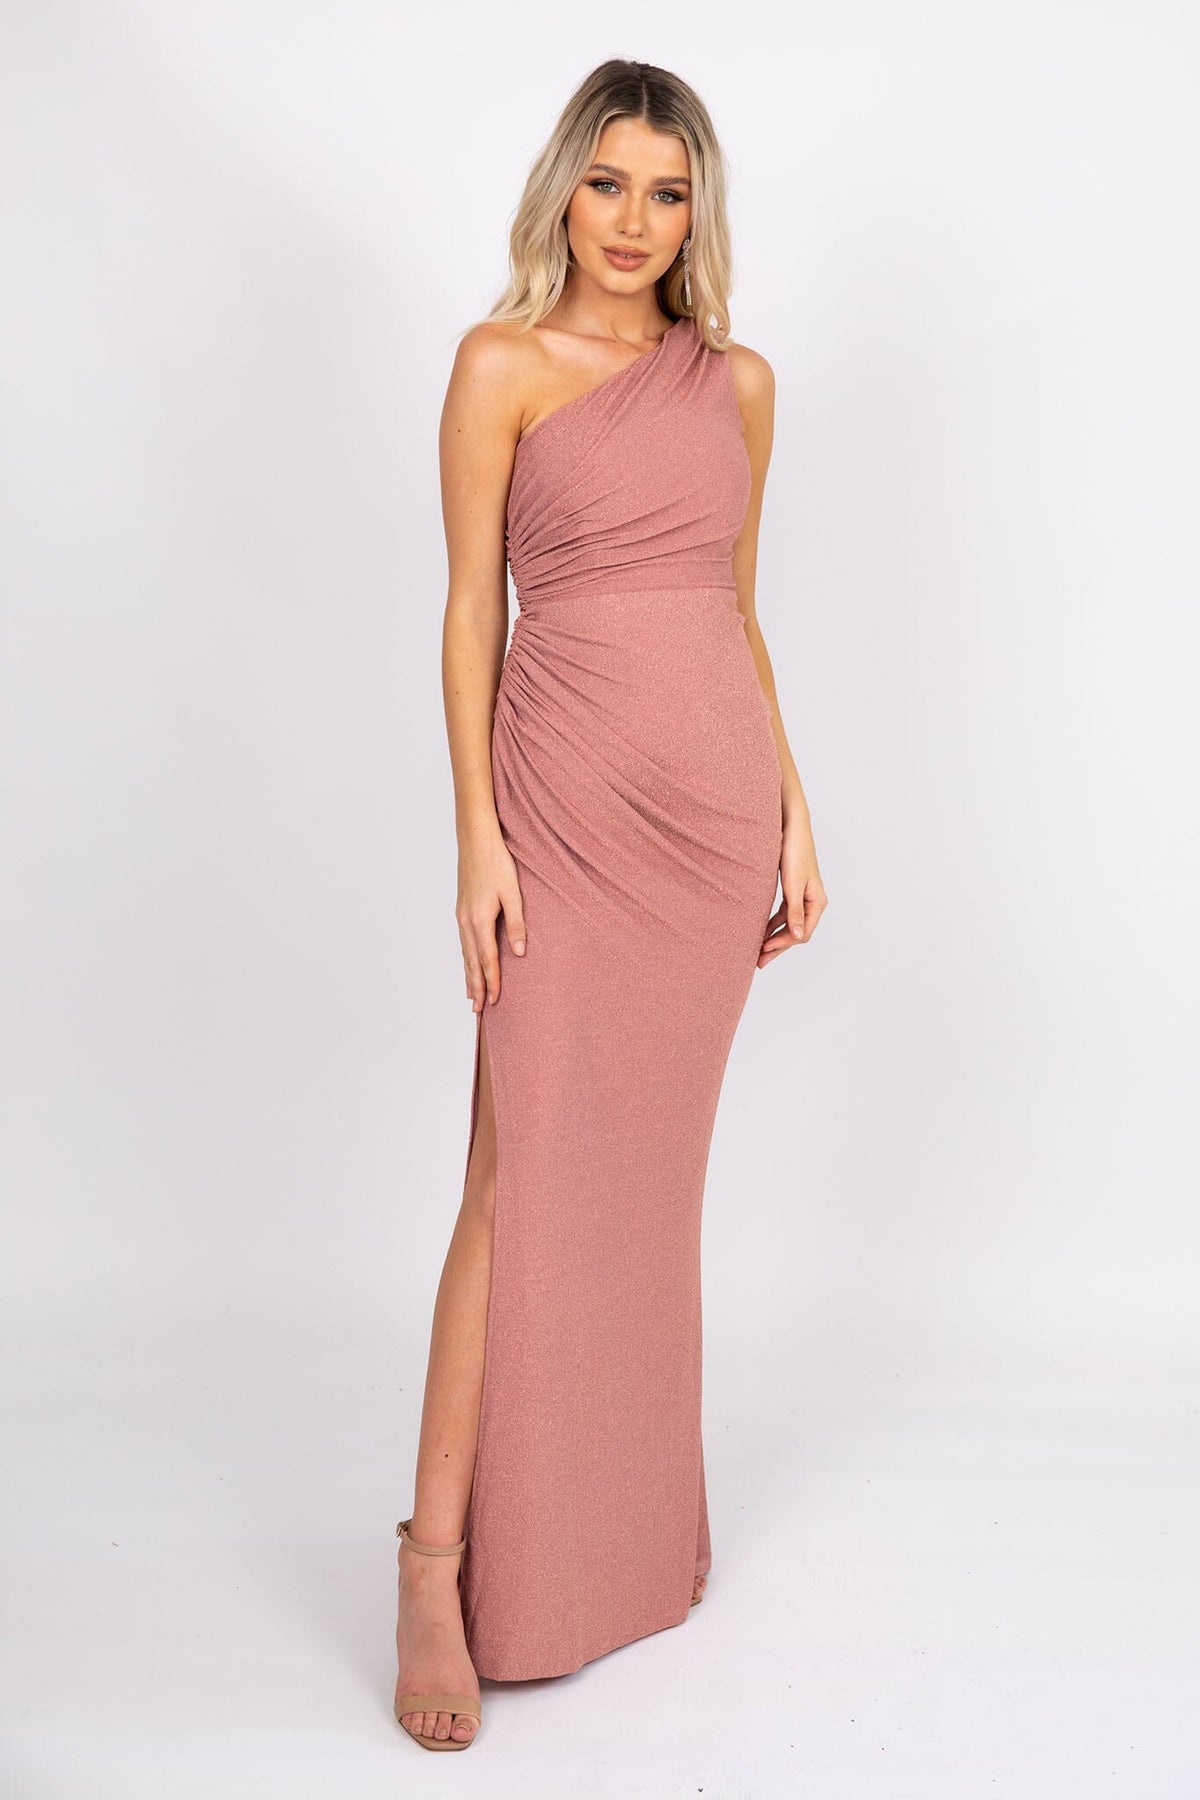 Dusty Pink Floor Length Fitted Evening Dress with One Shoulder Bodice, Draping Detail and Side Leg Slit